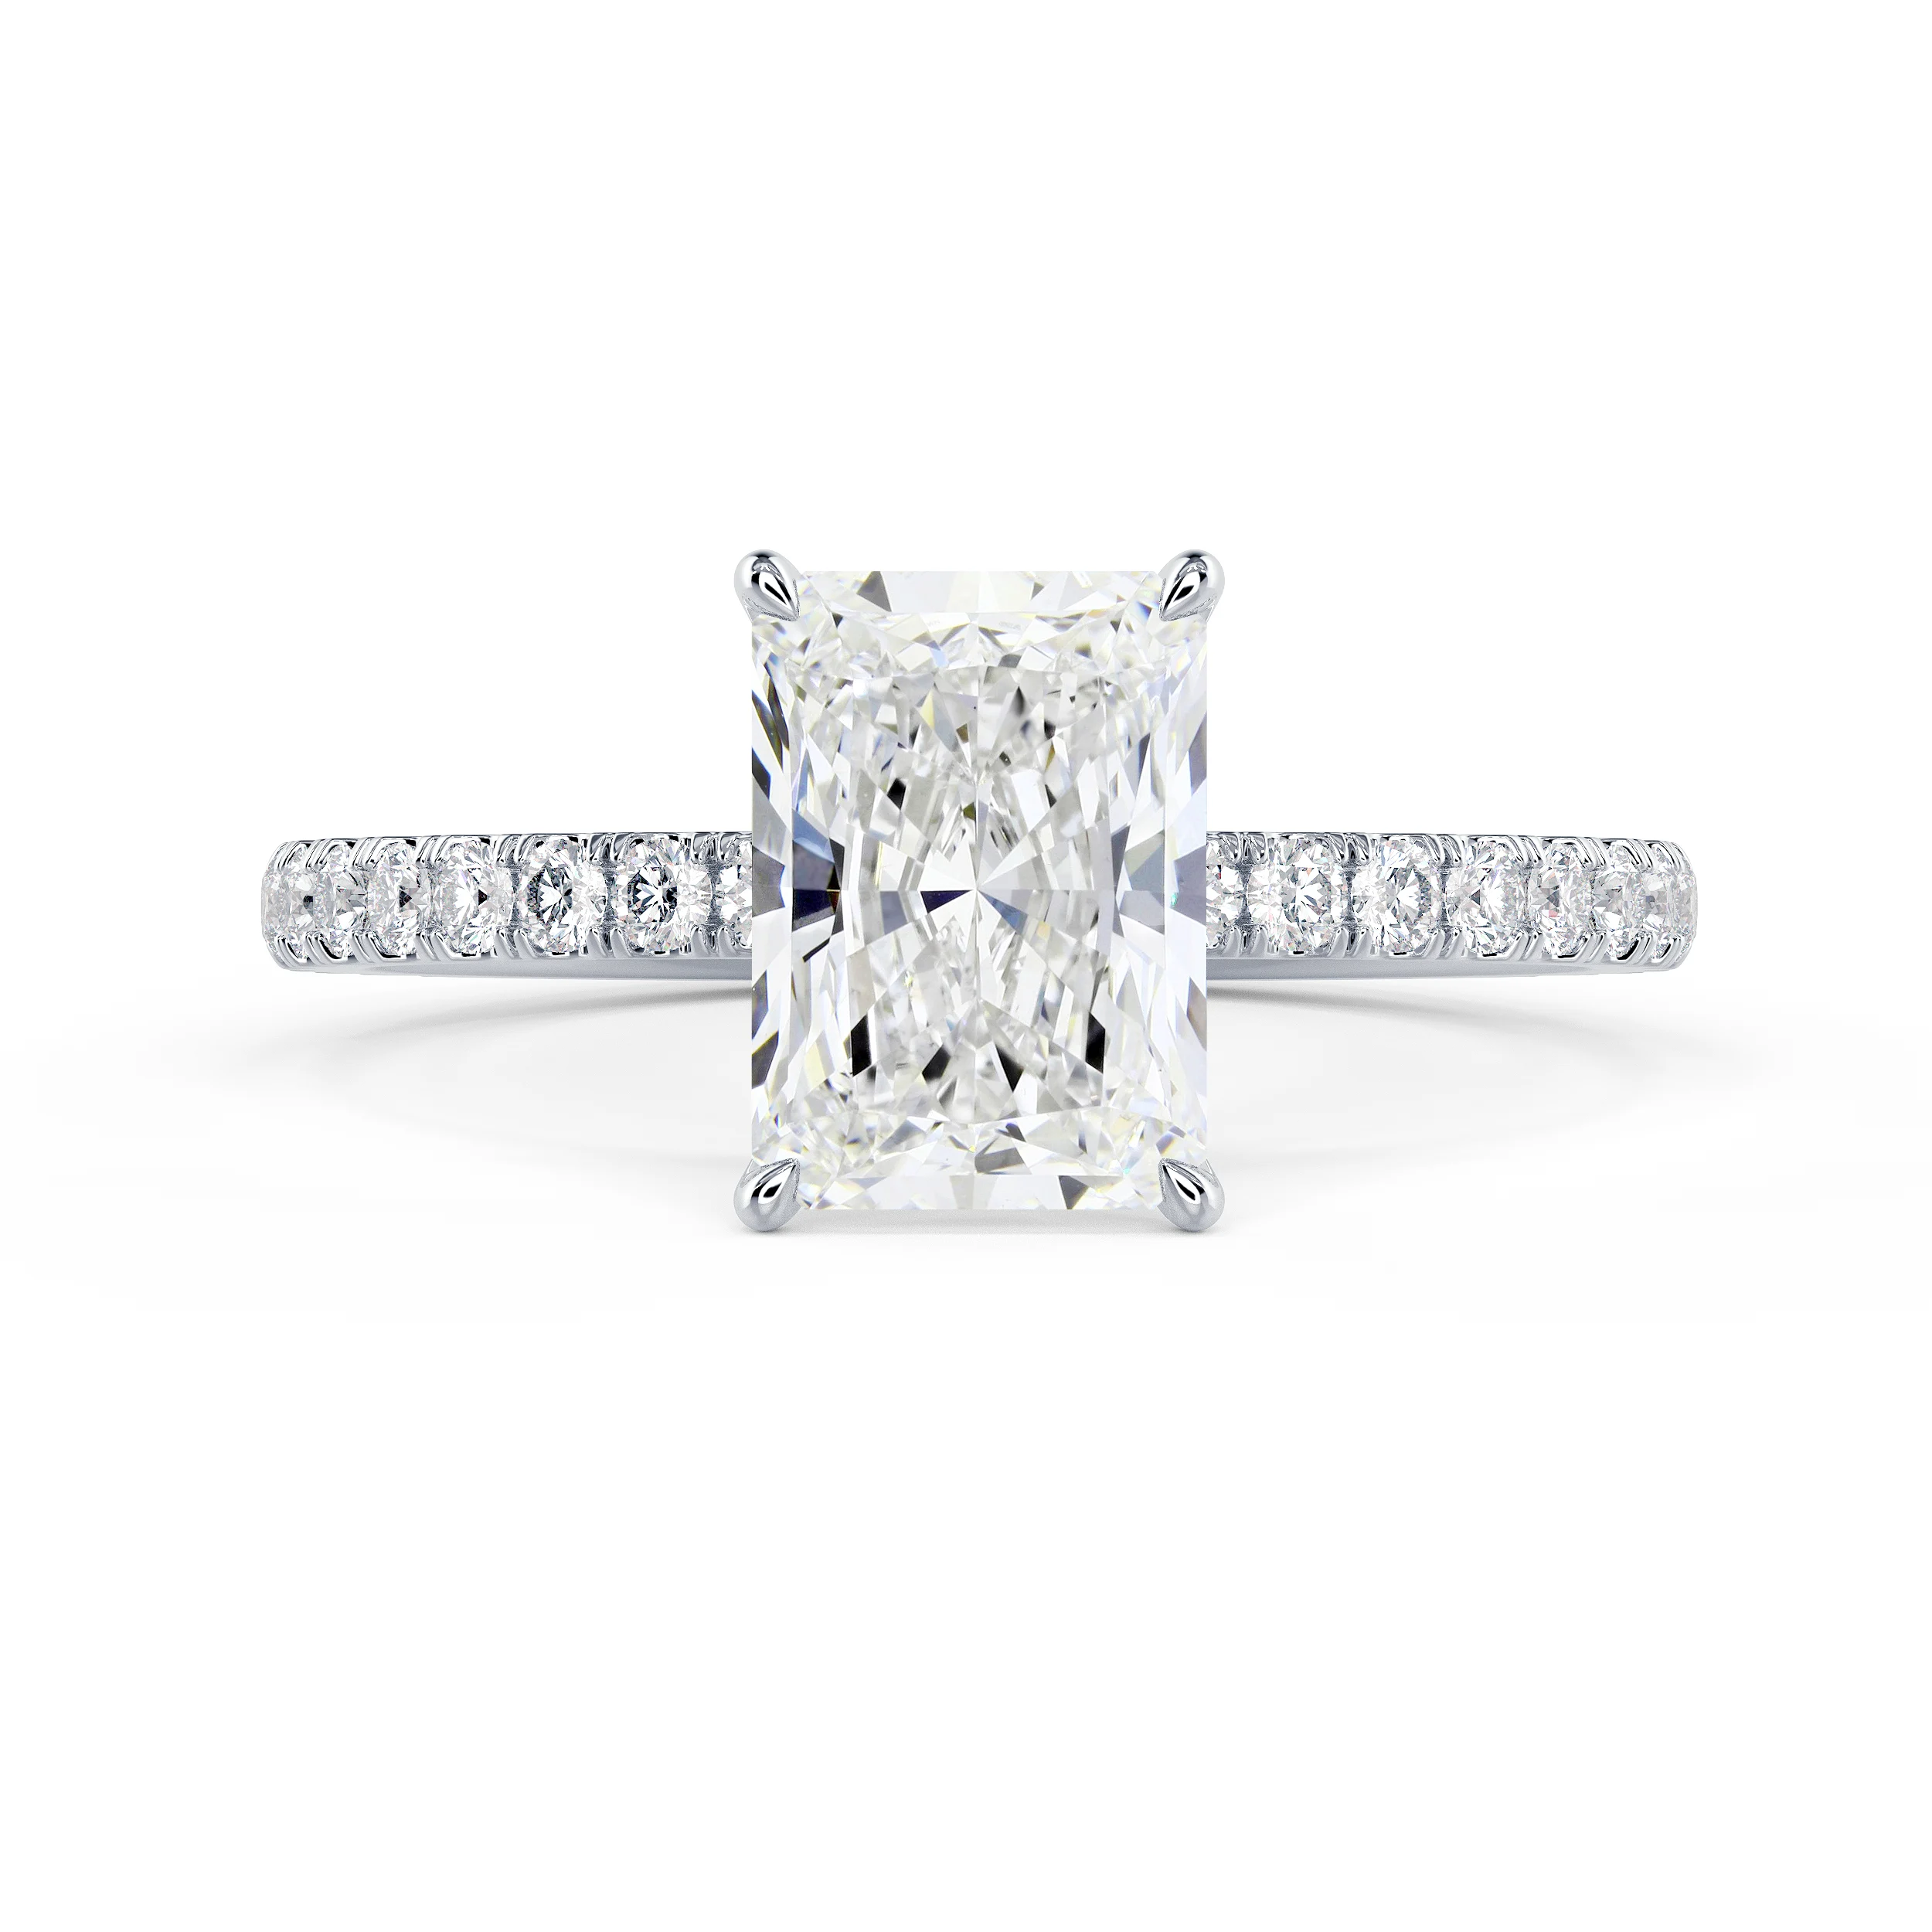 White Gold Radiant Classic Four Prong Pavé Diamond Engagement Ring featuring Exceptional Quality Diamonds (Main View)